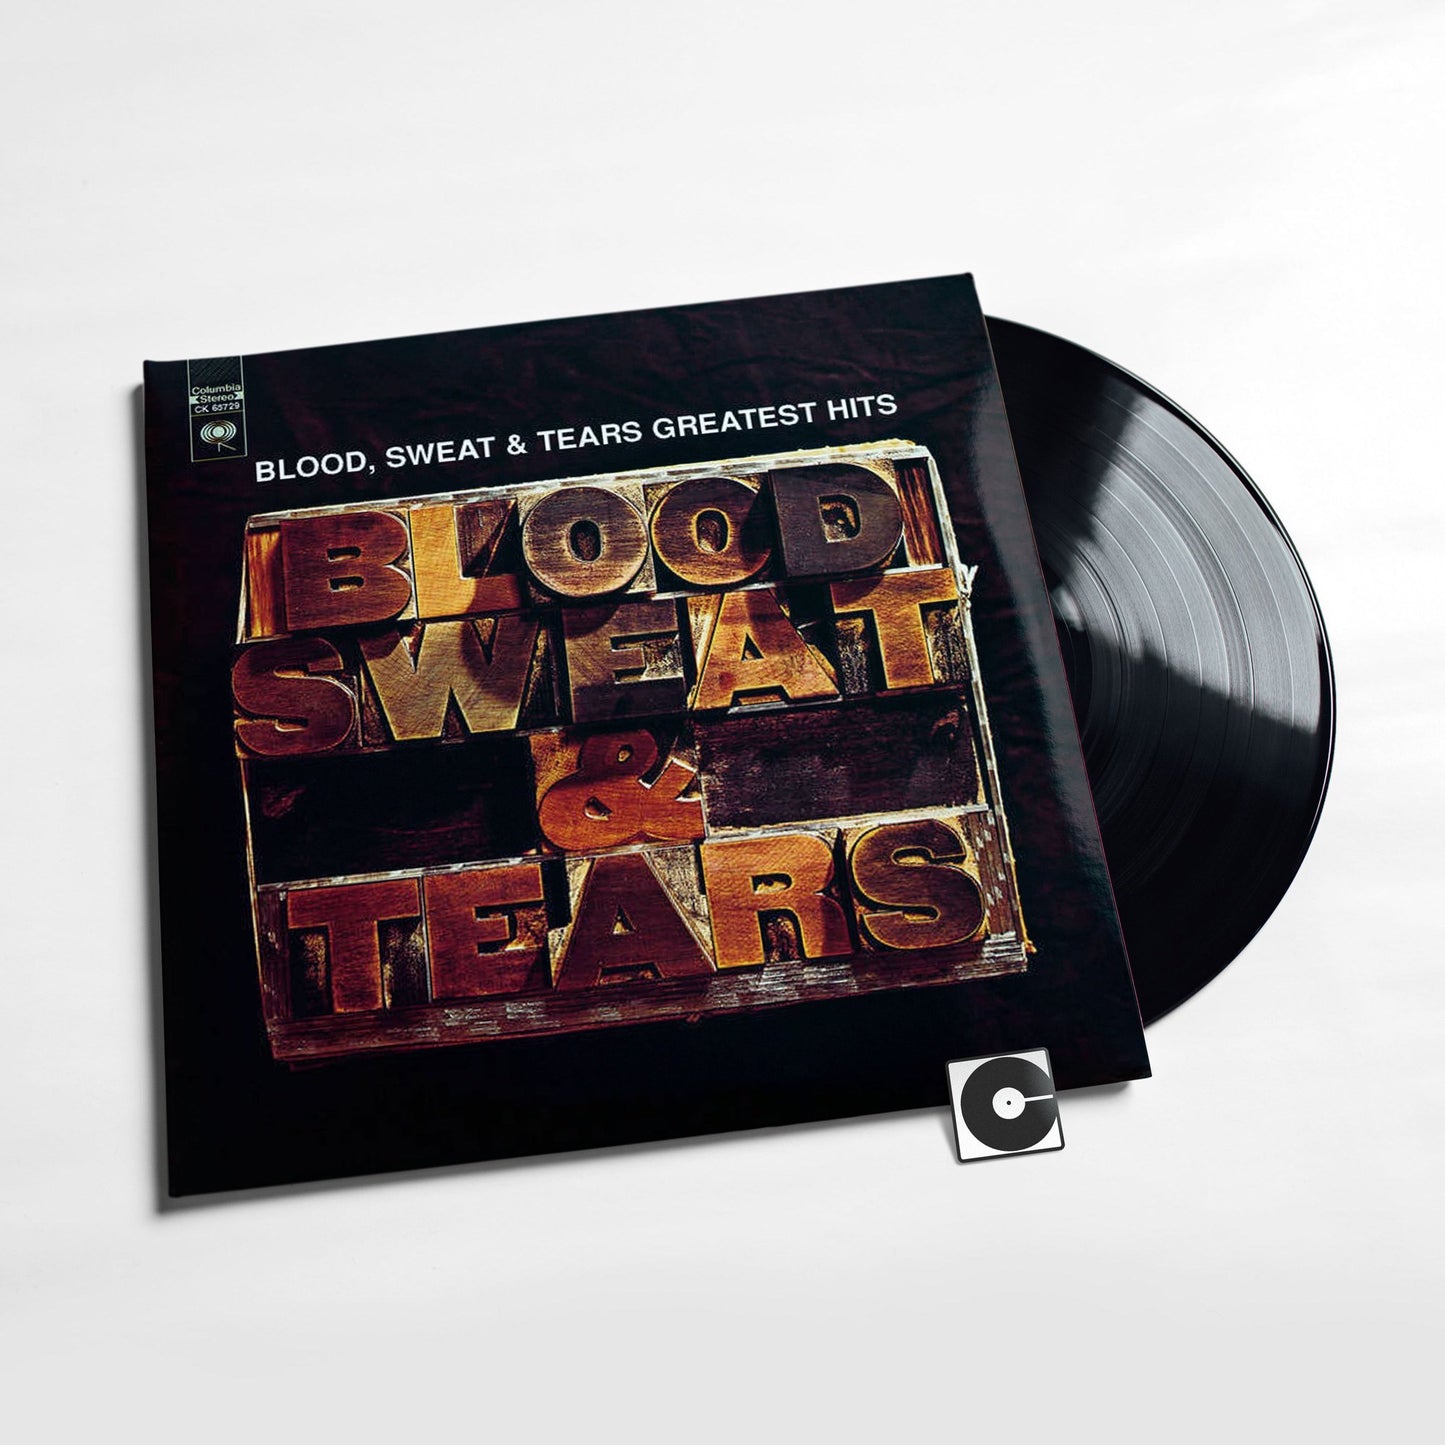 Blood, Sweat And Tears - "Greatest Hits"